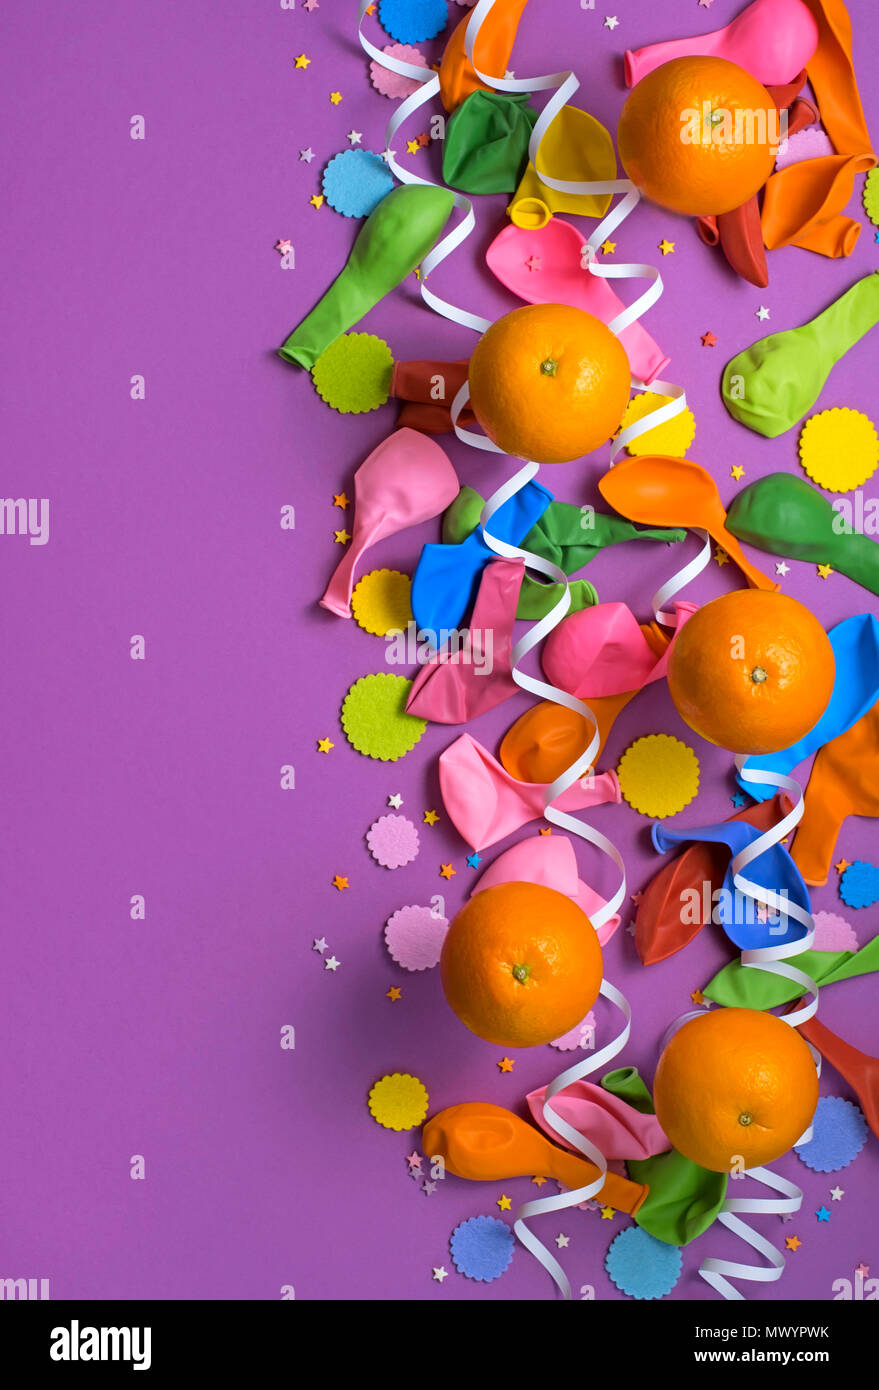 festive poster balloons orange Confetti carnival background ultraviolet. Flat lay top view Stock Photo